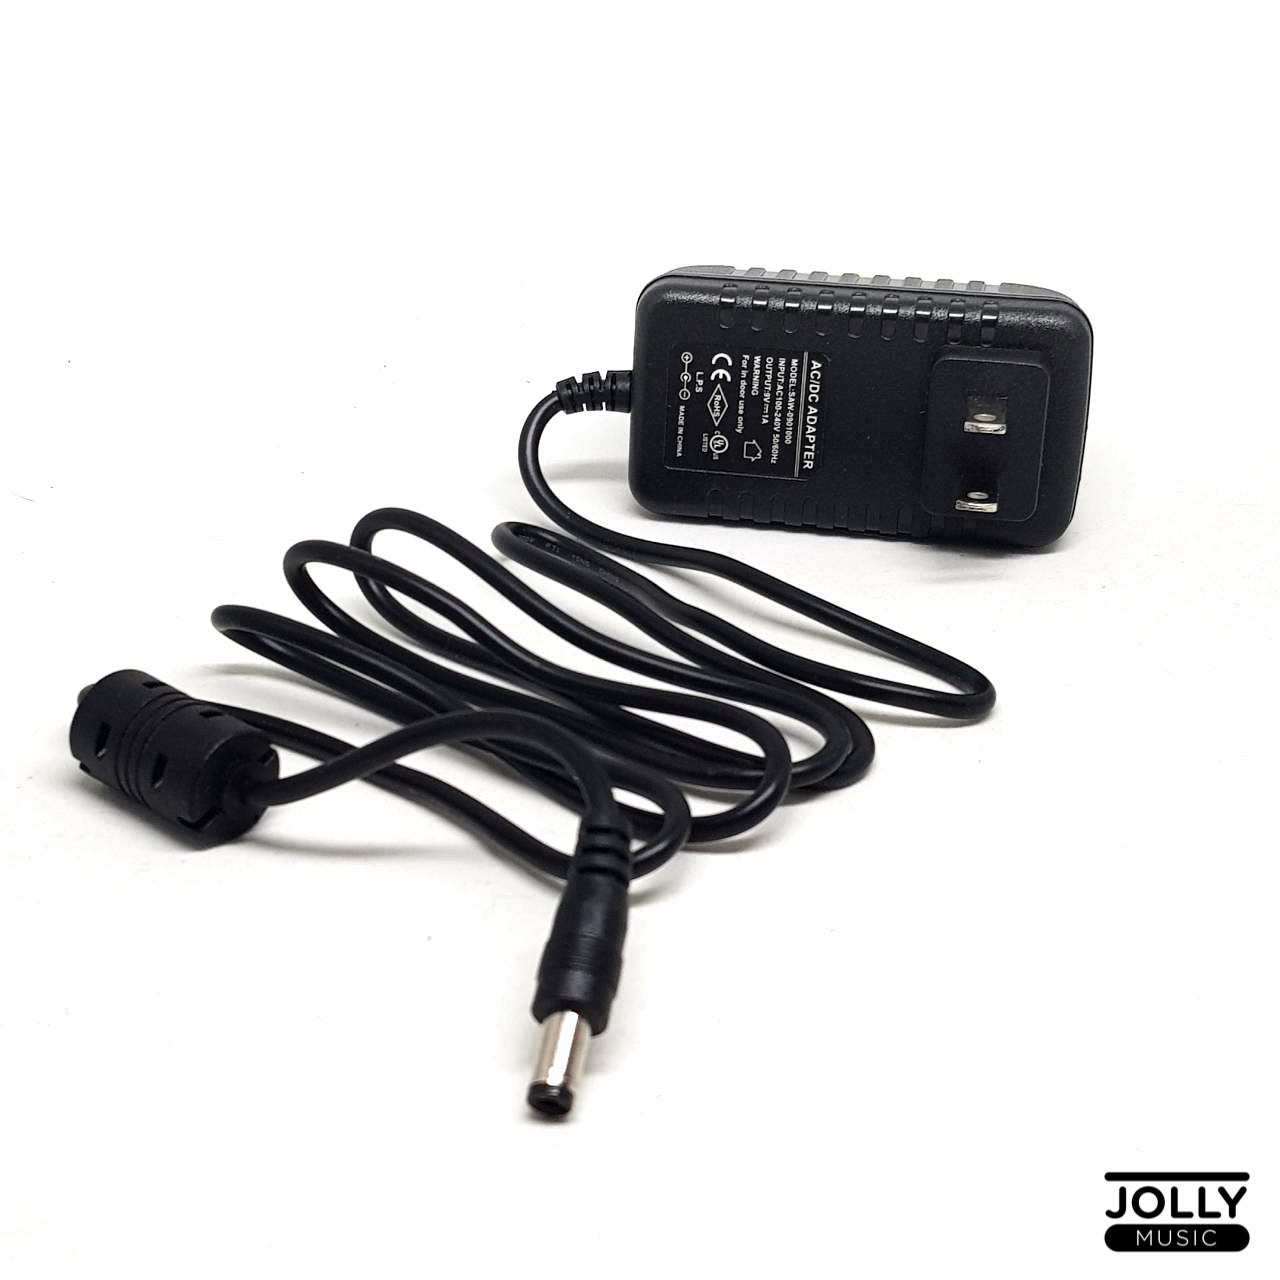 Caline CP-07B Power Adapter for Effects 9v 1000mA with Daisy Chain and Converters